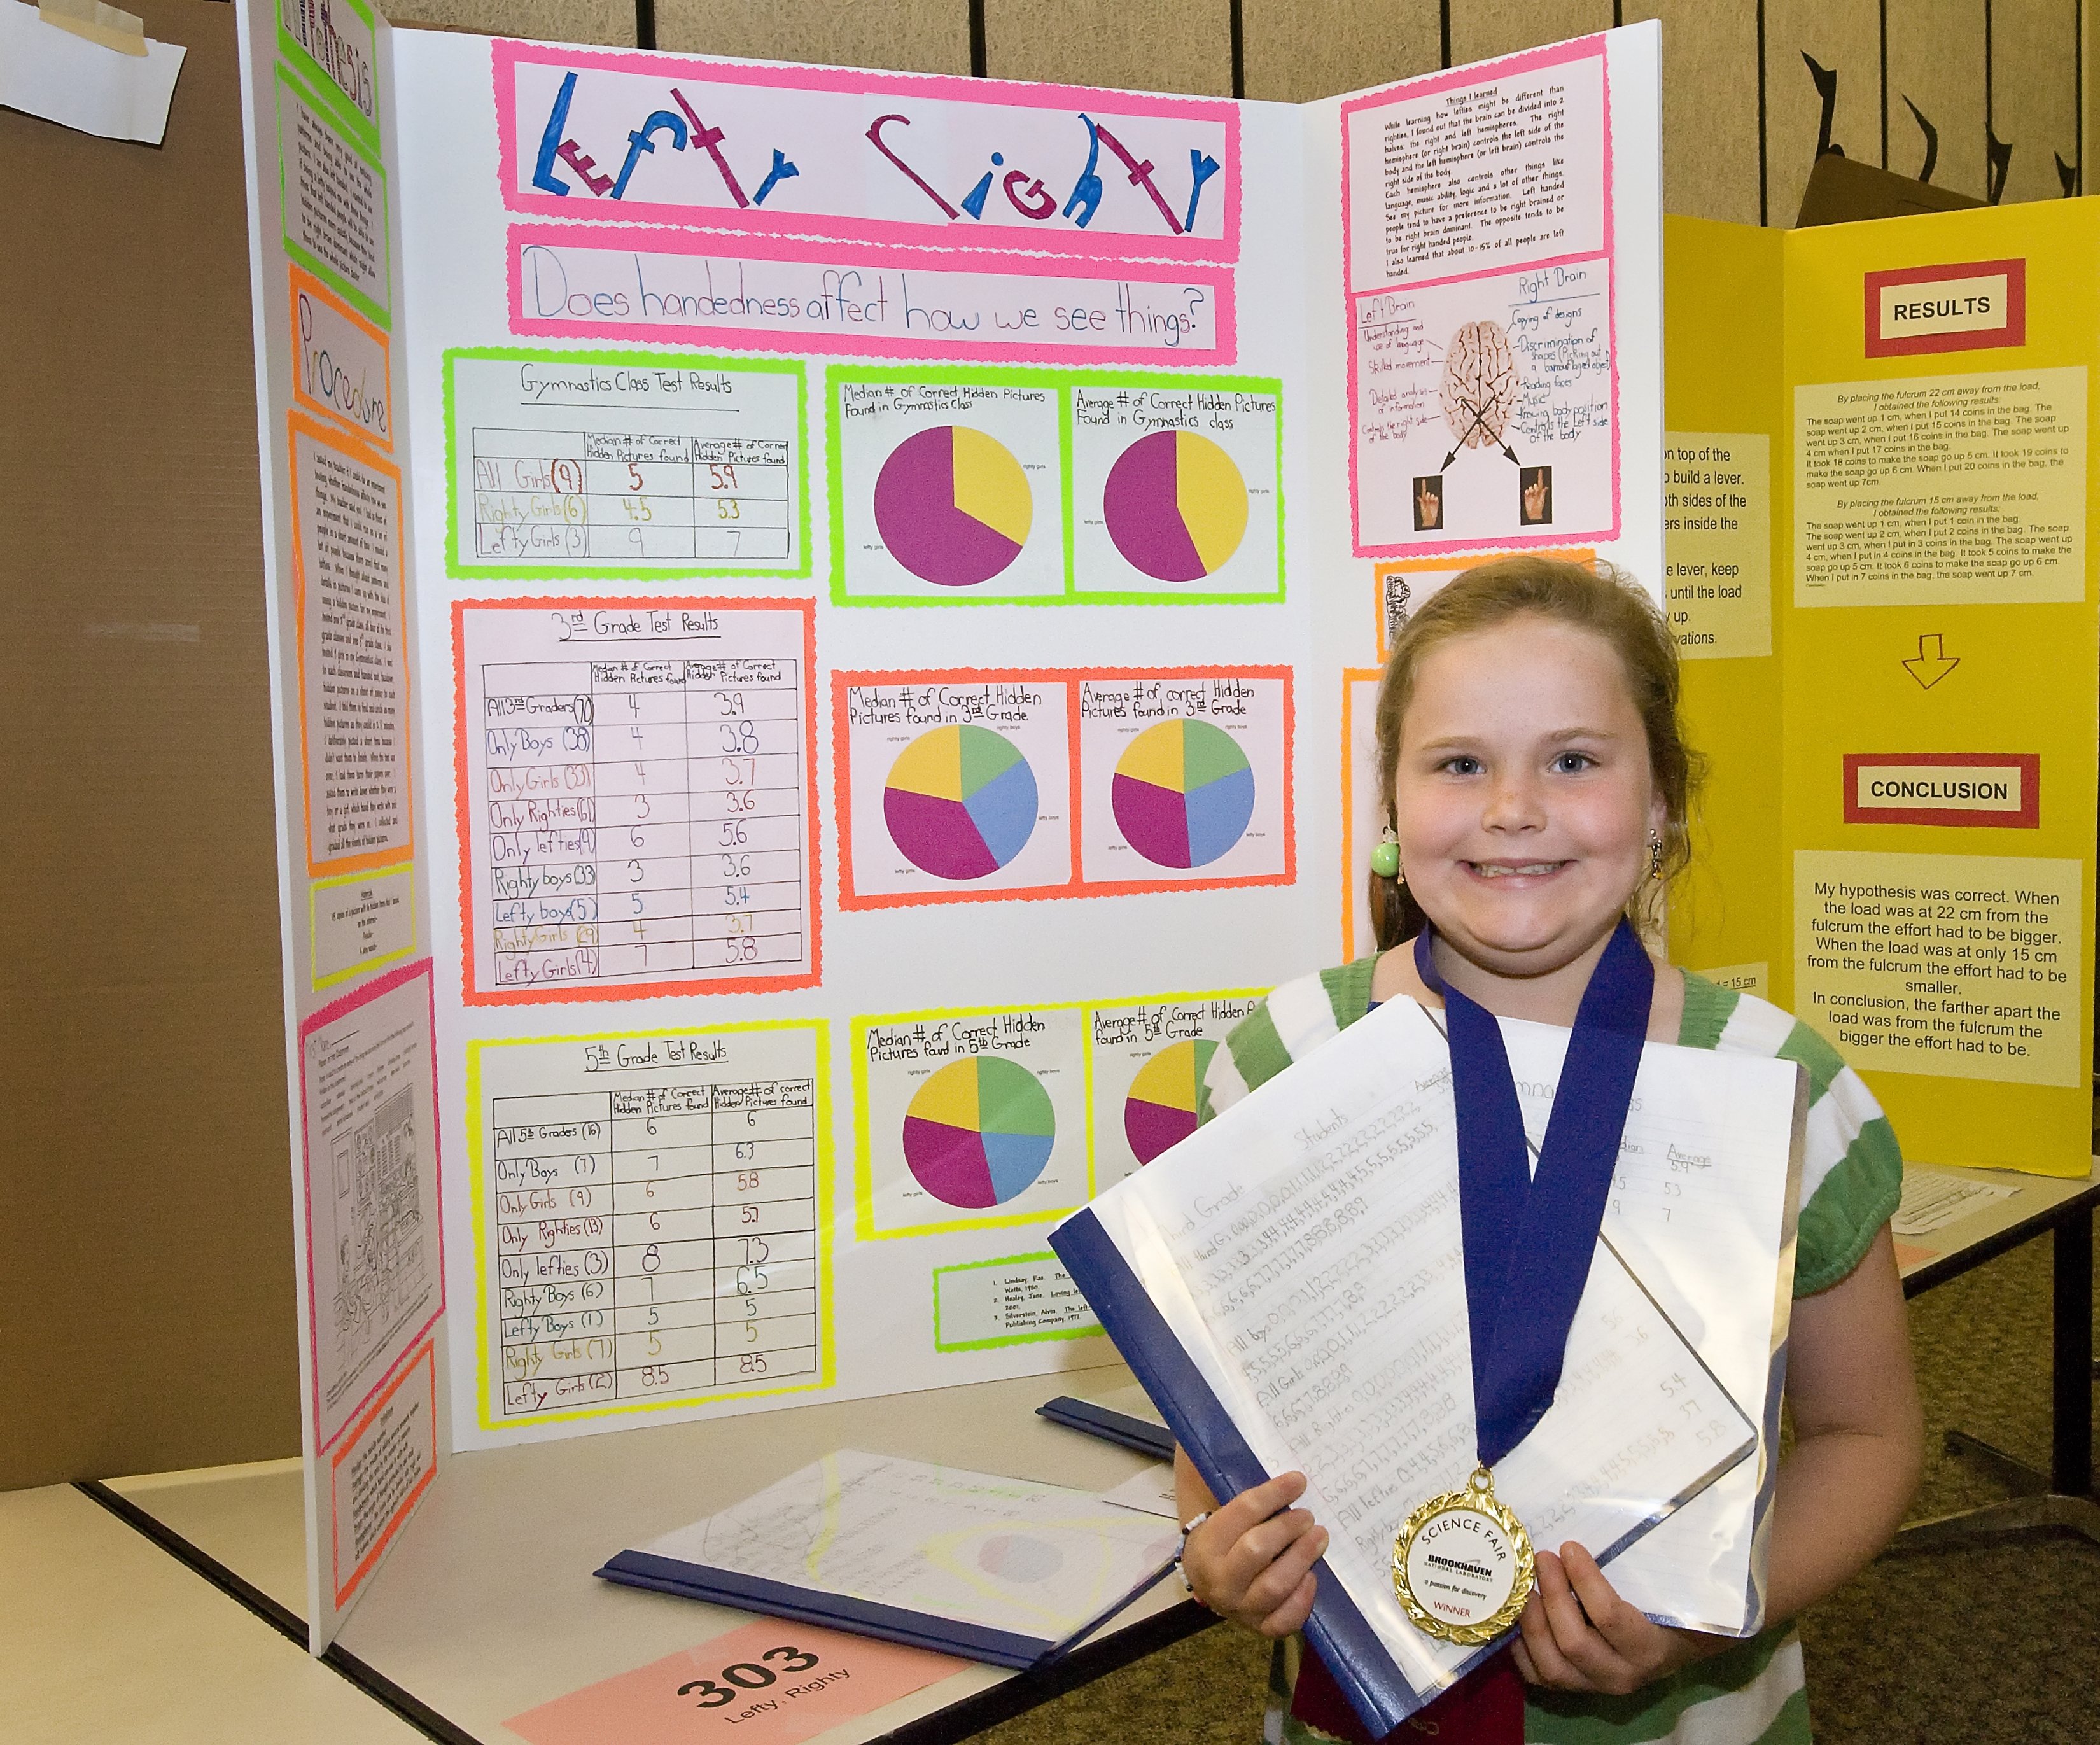 10 Perfect Science Fair Project Ideas 4Th Grade second grade science fair project ideas homeshealth 8 2022